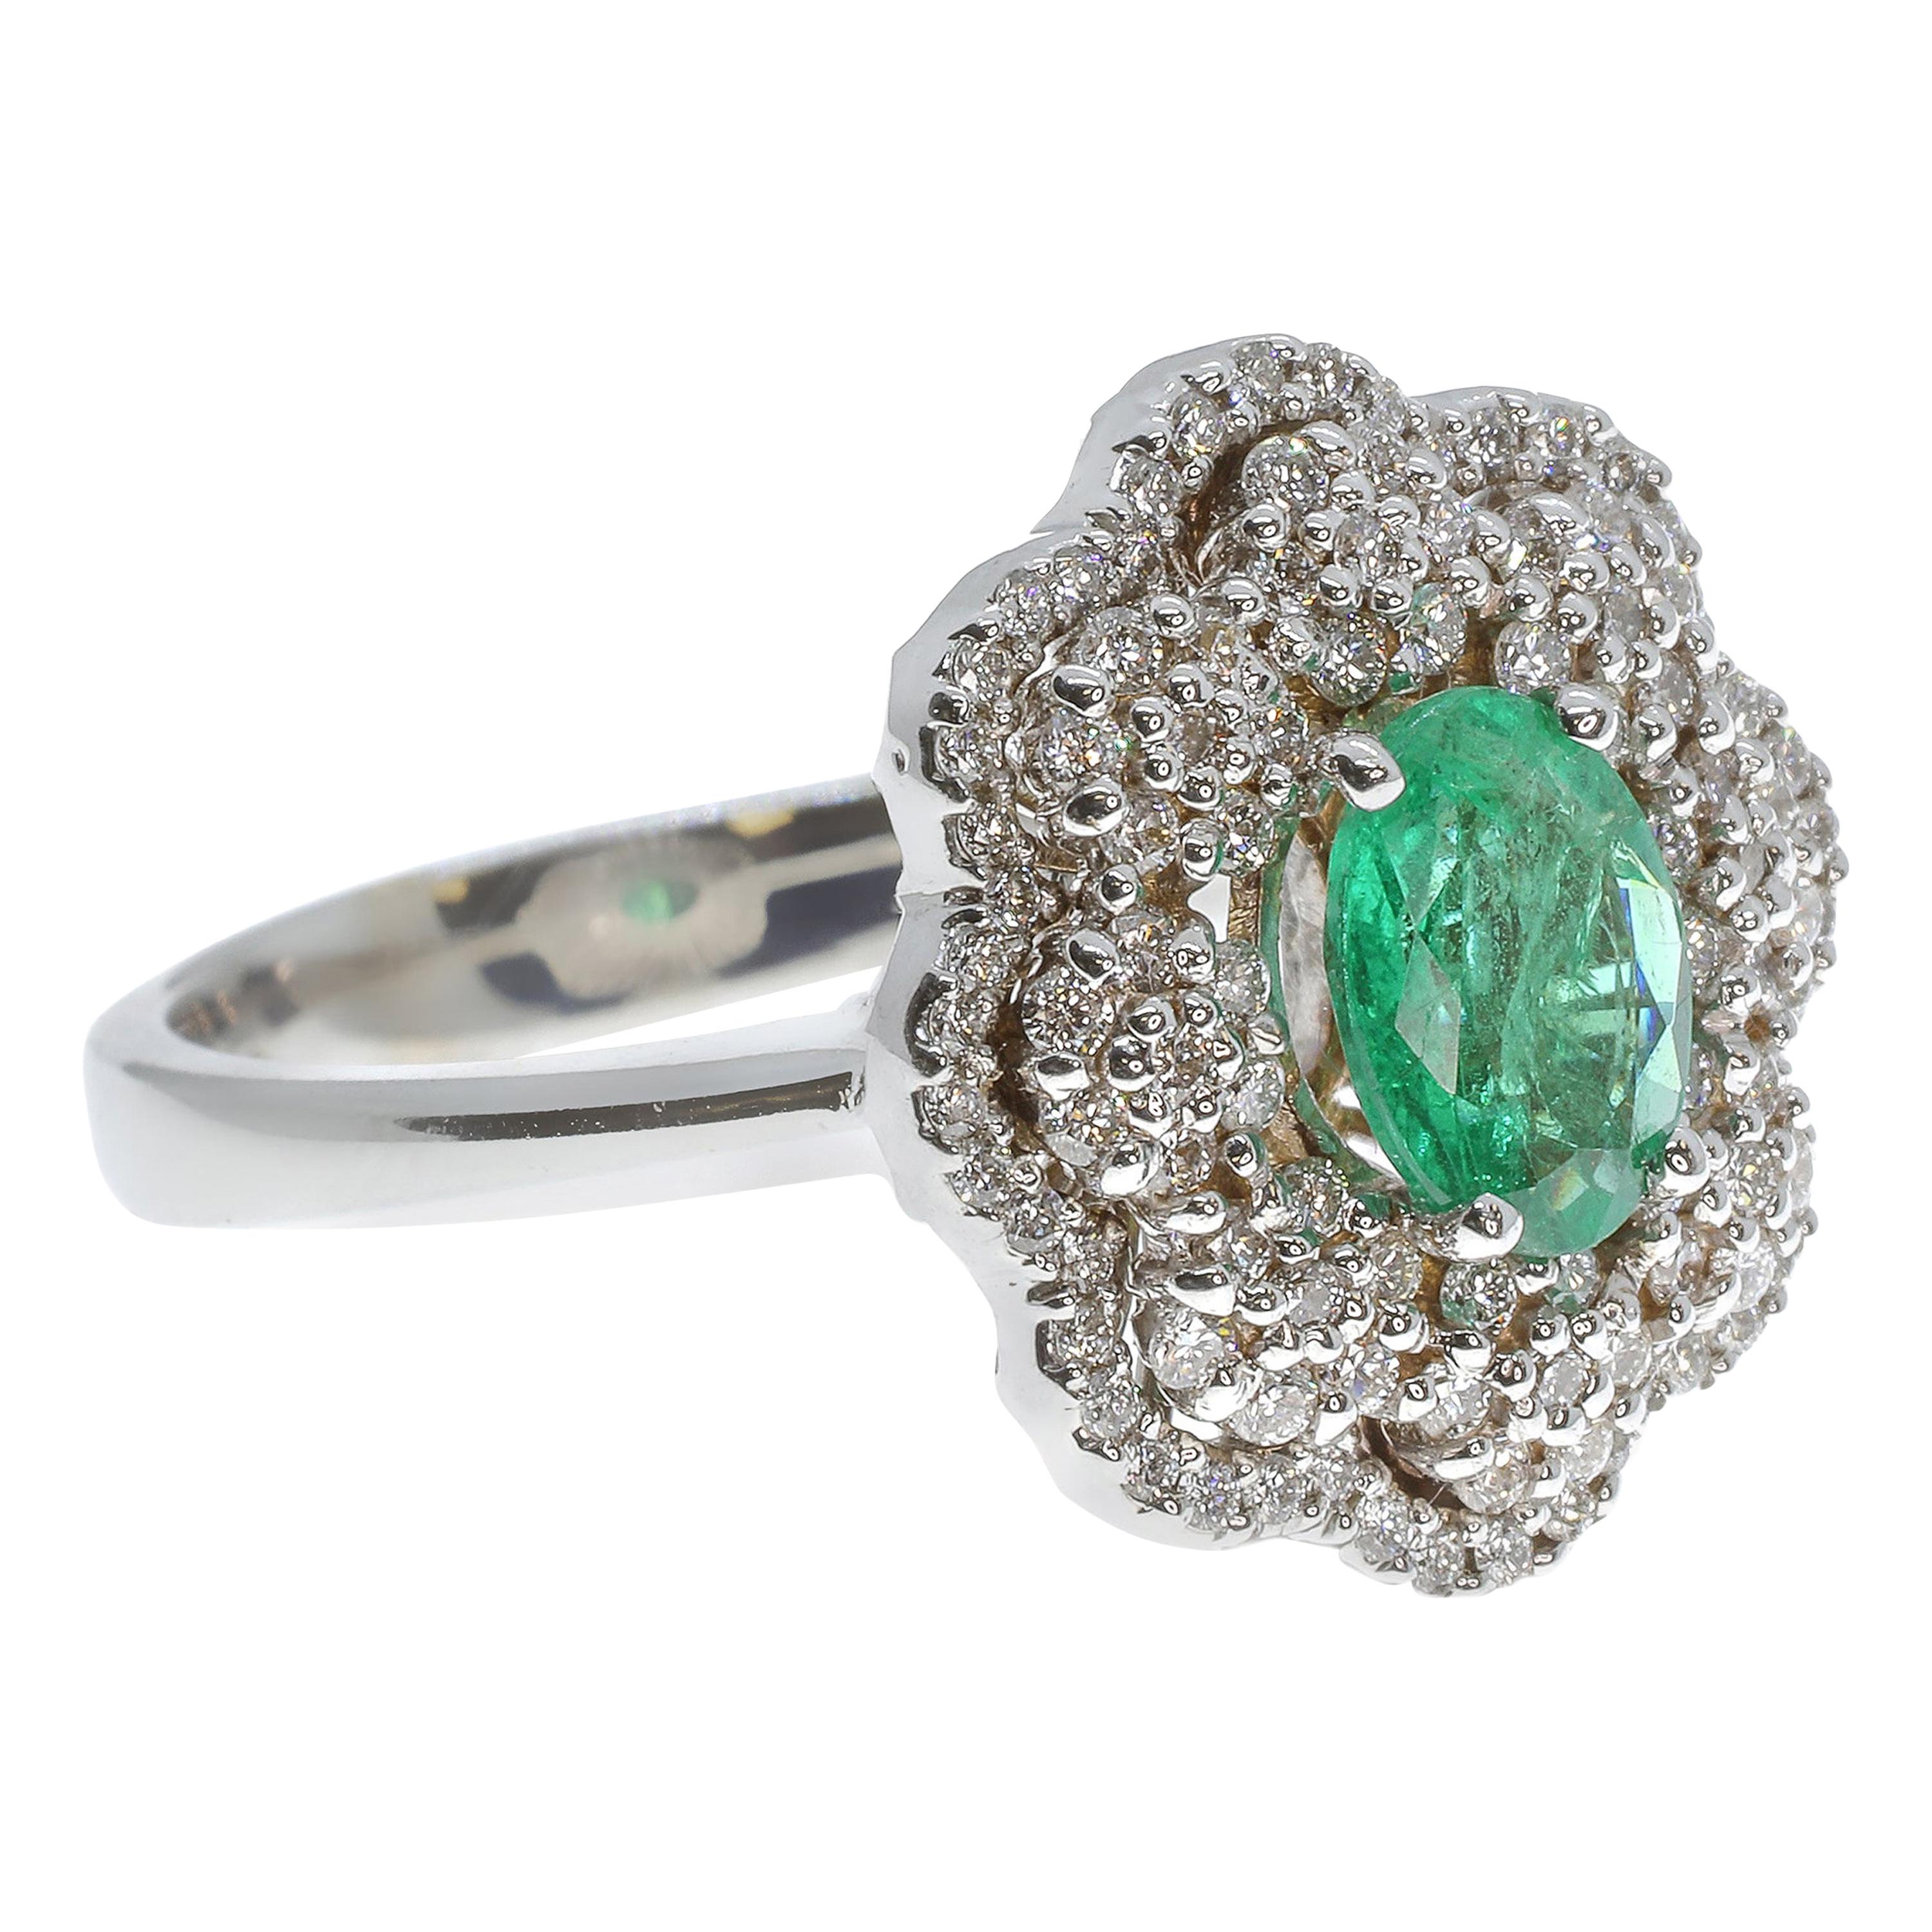 This dazzling jewel is hand-crafted in Sicily. The central emerald (.91 carats) is an incredible centrepiece, framed by clusters of .61 carats of sparkling white diamonds and set in 18-karat white gold. The ring is a unique beauty reminiscent of a